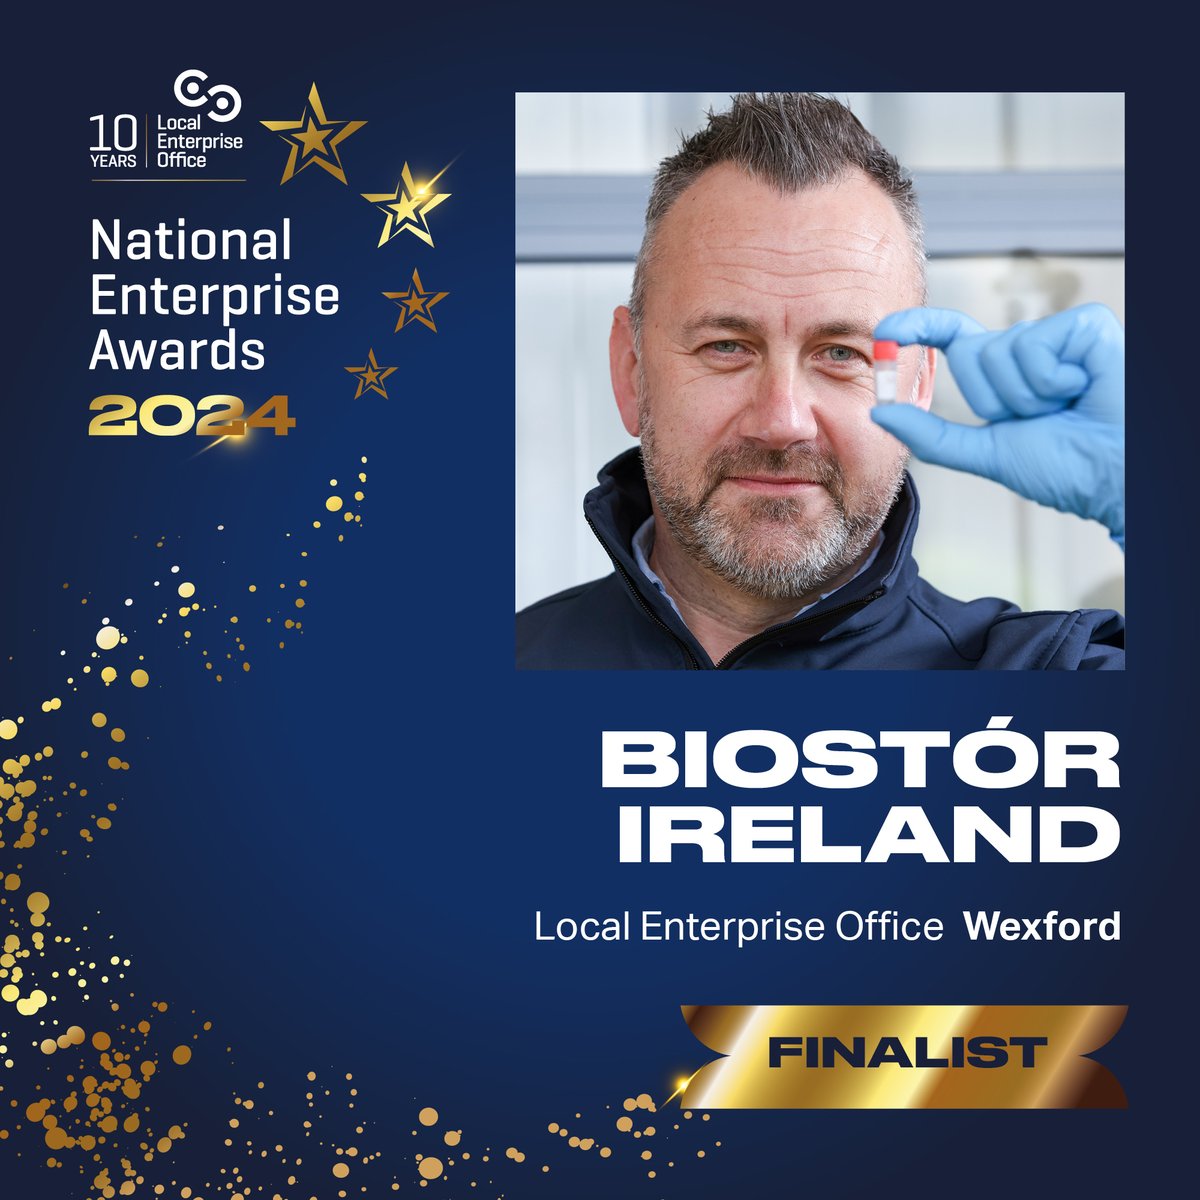 Wishing Biostór Ireland the very best as they proudly represent Wexford, at the esteemed National Enterprise Awards 2024, taking place at the renowned Mansion House in Dublin Thursday 23rd May 2023. Best of luck!